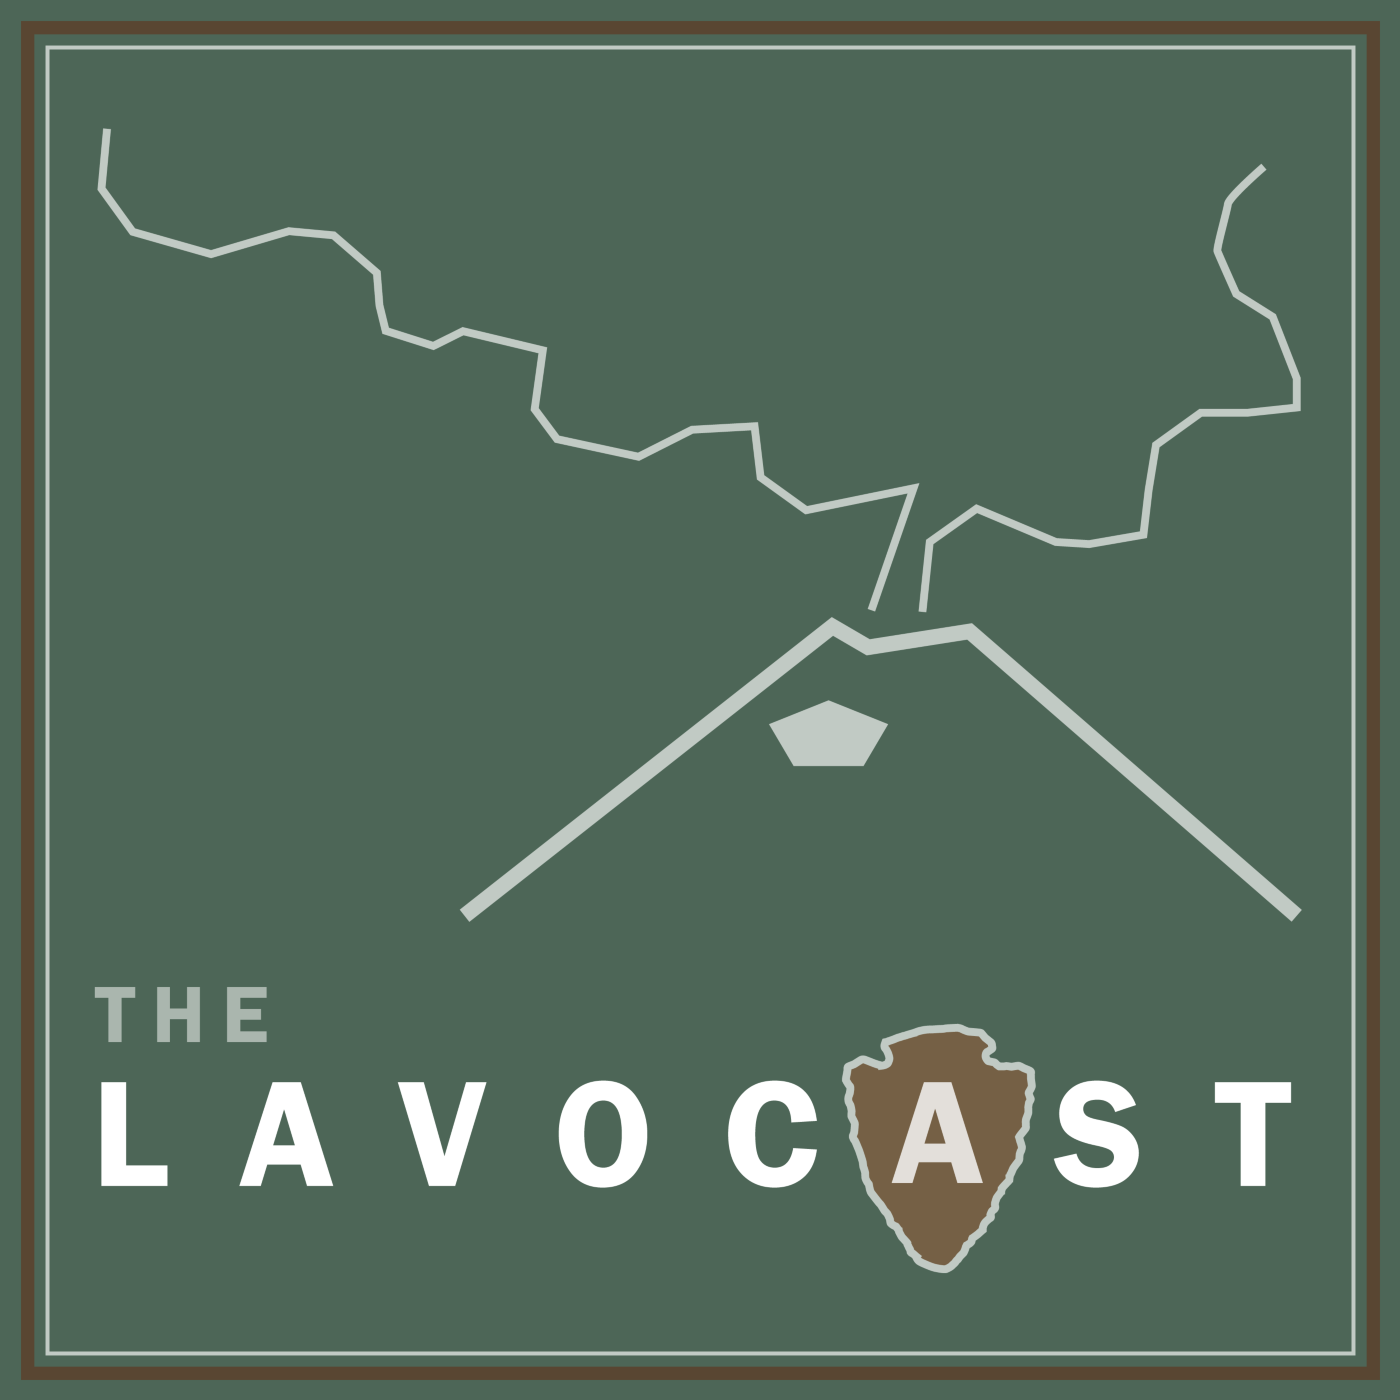 Line drawing of an erupting volcano, light gray on dark green background, and the words The Lavocast